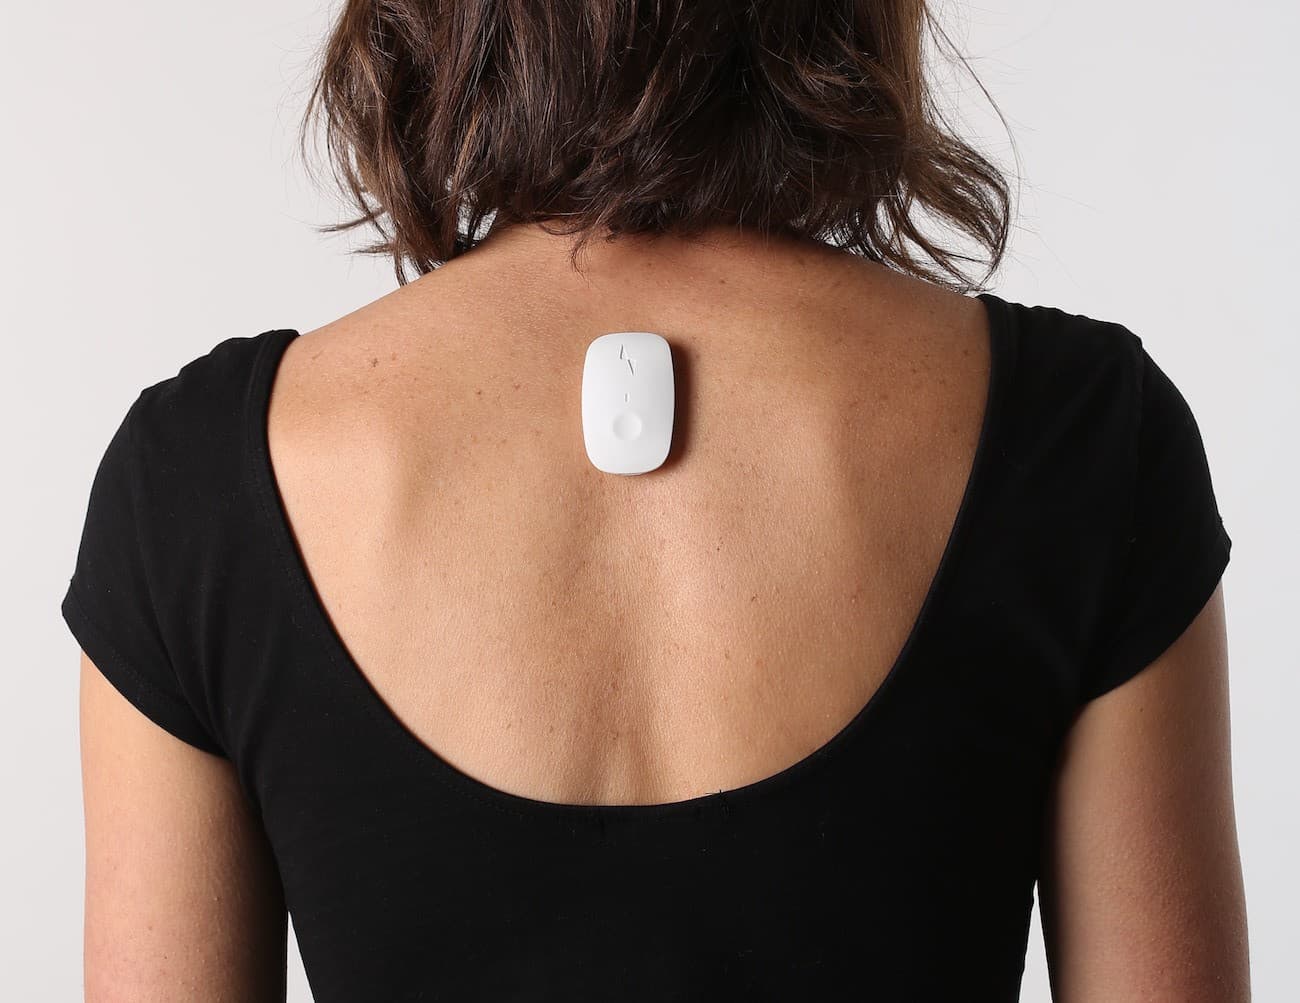 Improve Your Posture with this Innovative Wearable Device